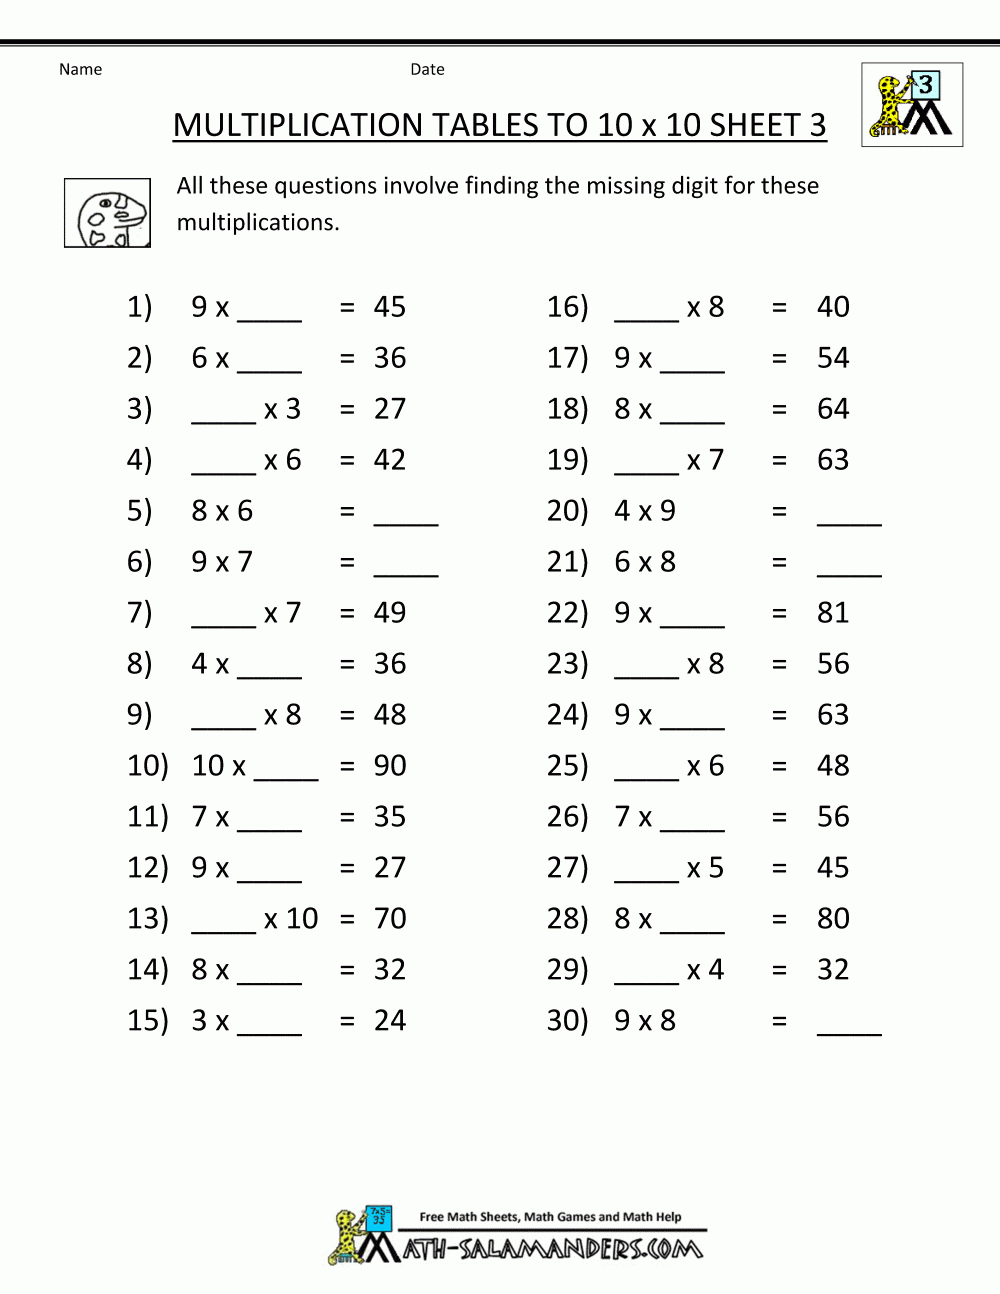 Multiplication Table Worksheets To 10X10 3 | Mental Maths